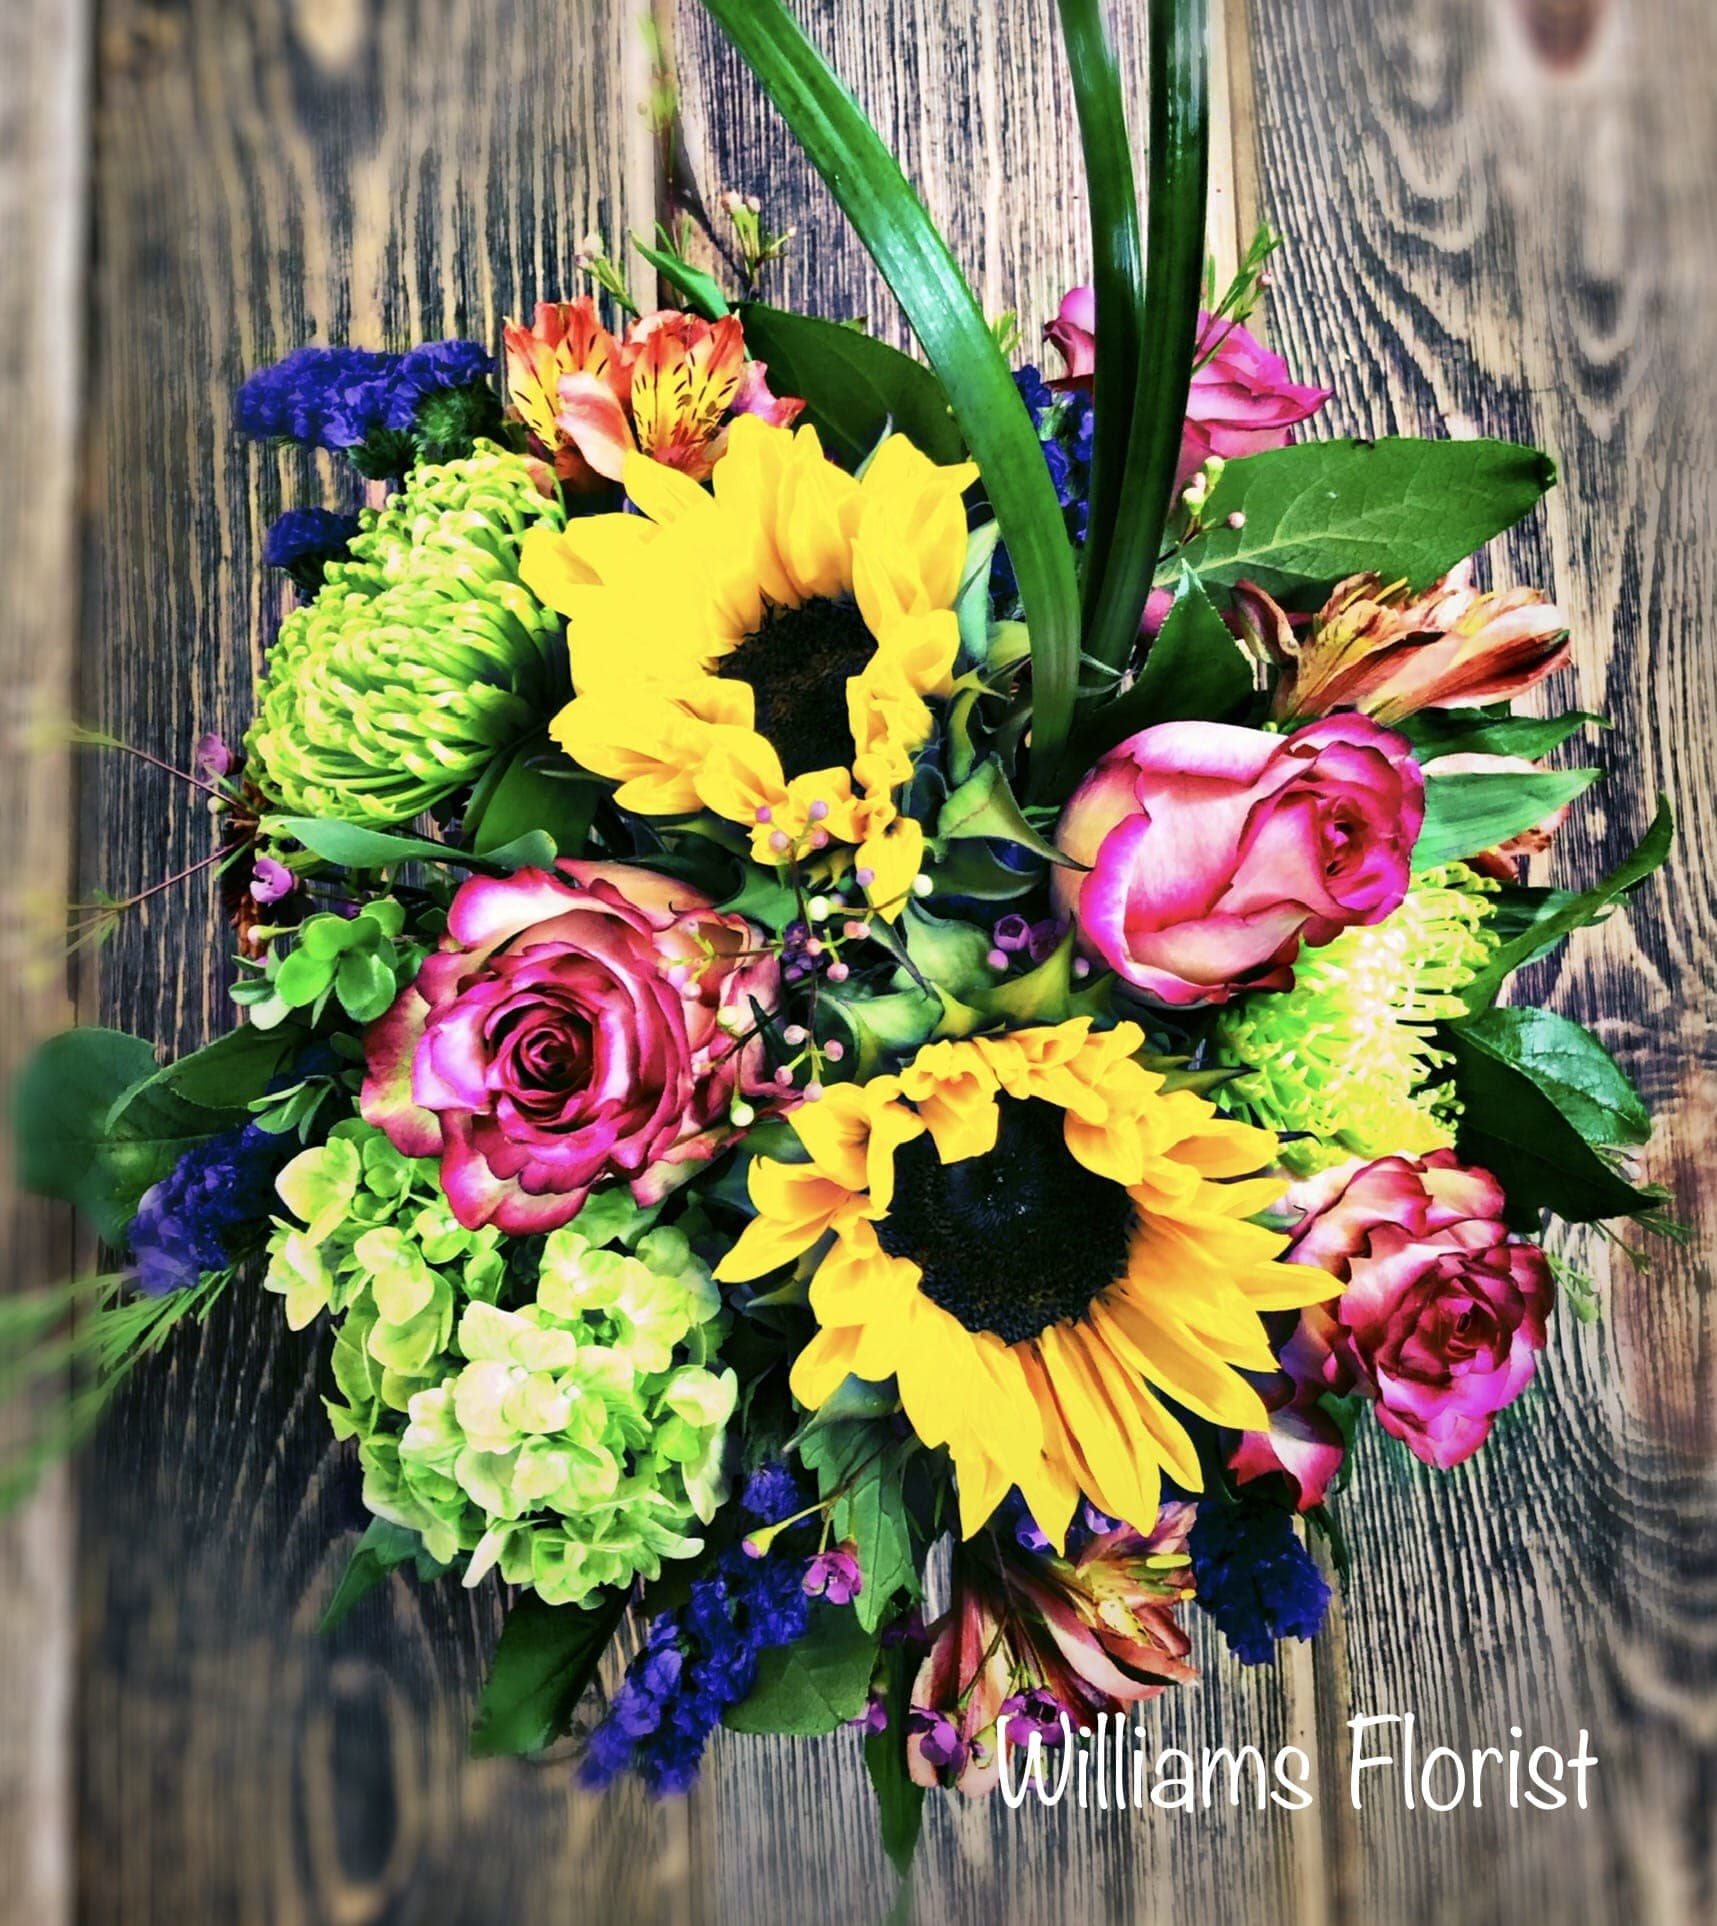 Summer Parade - Designed to be as unforgettable as the person who receives it, our luxurious arrangement of colorful, fresh-from-the-garden blooms, artistically designed inside a chic cube vase by our expert florists, creates the ultimate wow gift for someone who means the world to you.